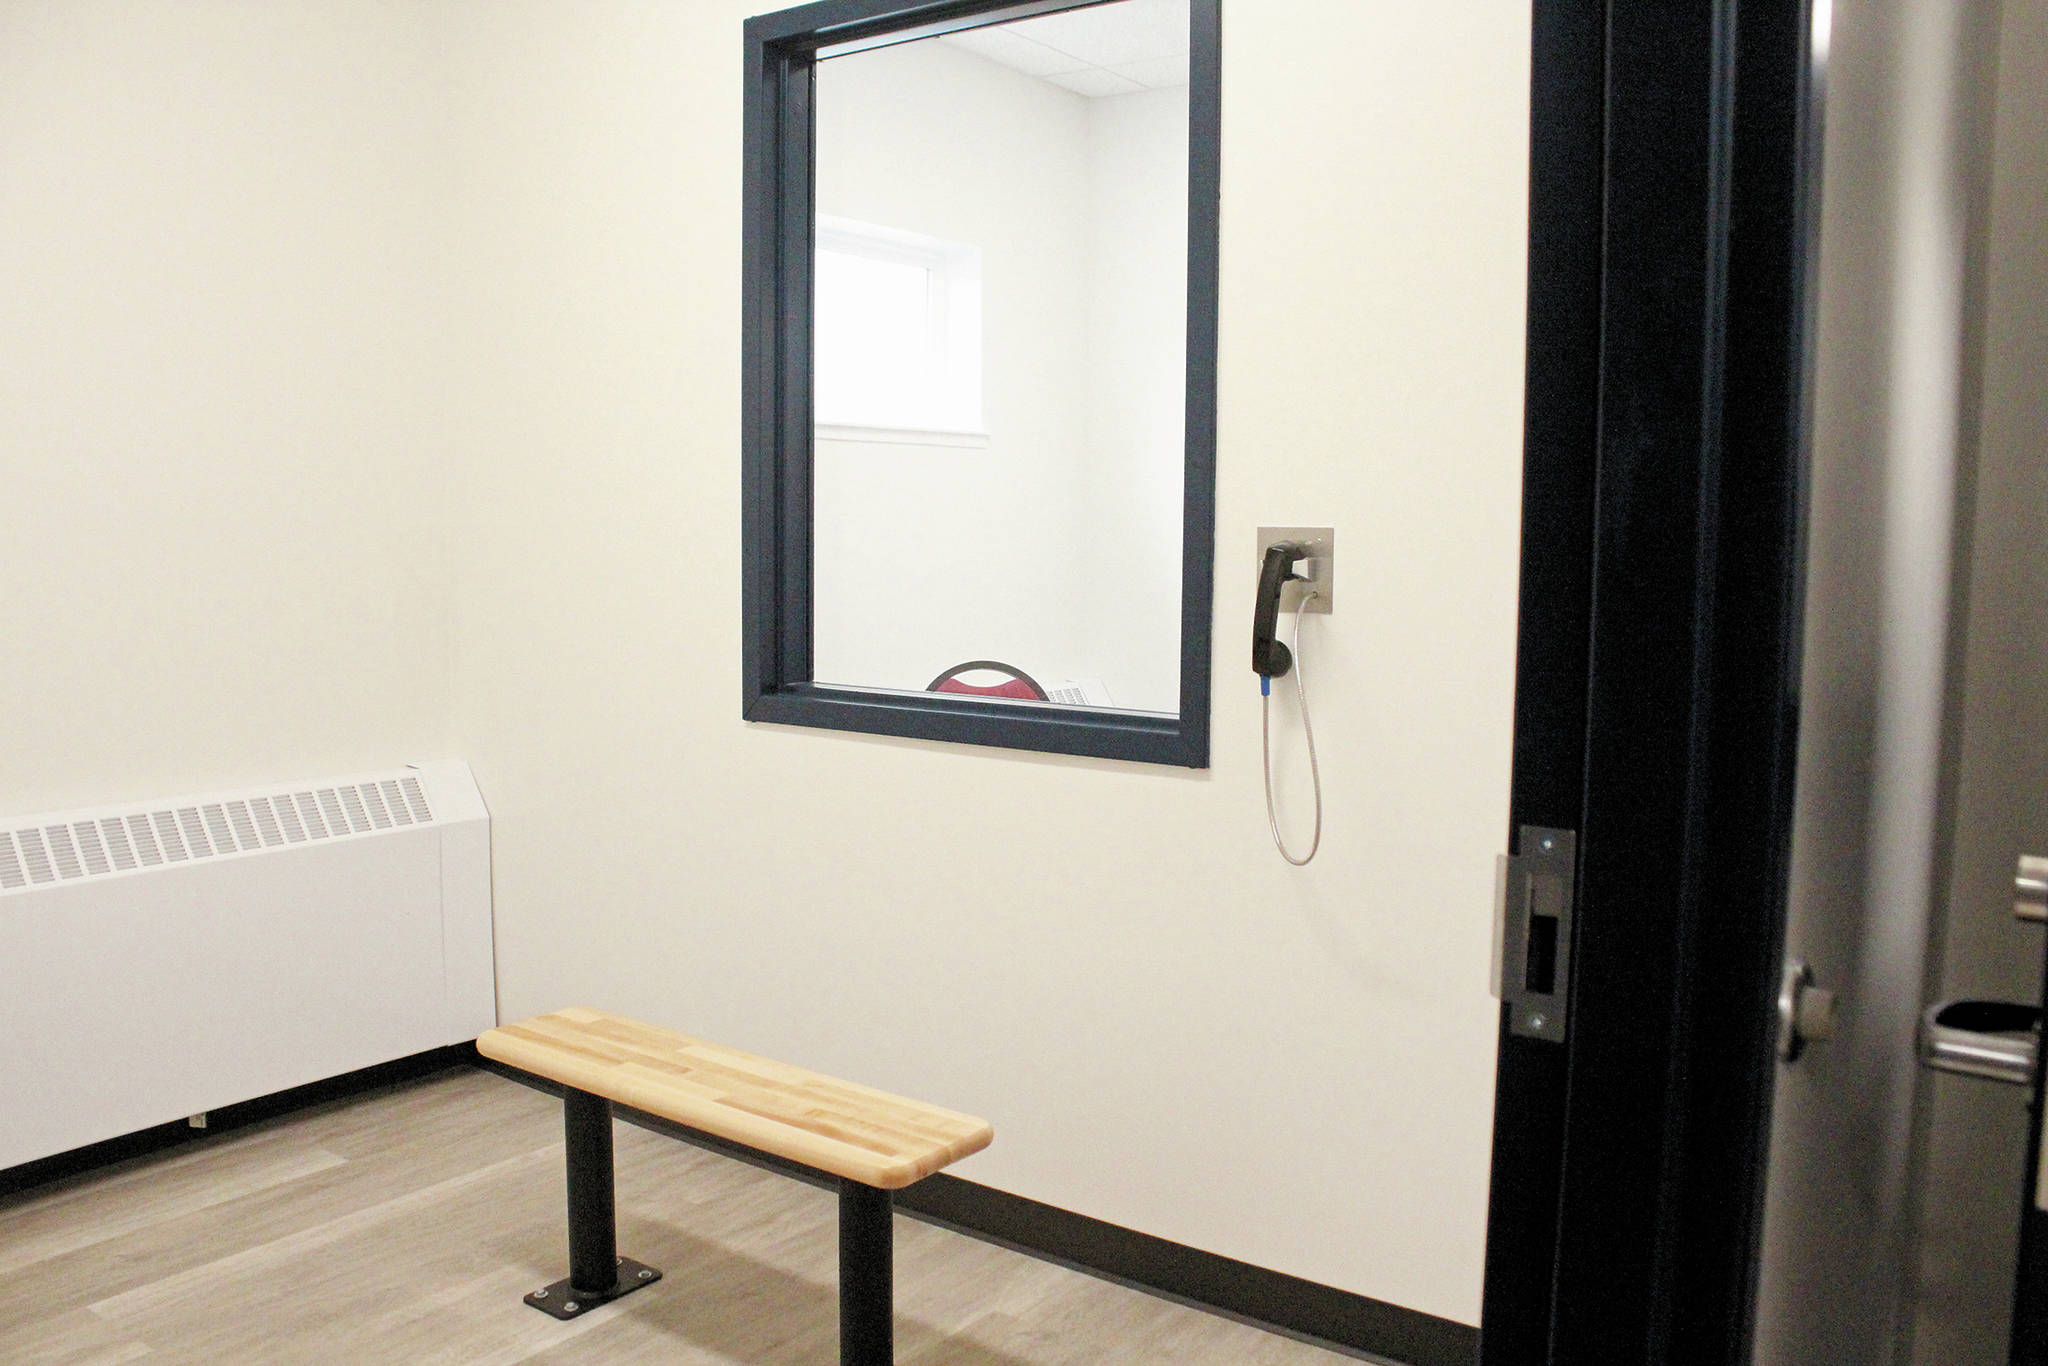 The visitation room in the new Homer Police Station, seen here Thursday, Sept. 24, 2020 in Homer, Alaska, is completely separate from the administrative side of the building. In the old police station, prisoners had to be taken into the administrative space to meet with visitors. (Photo by Megan Pacer/Homer News)